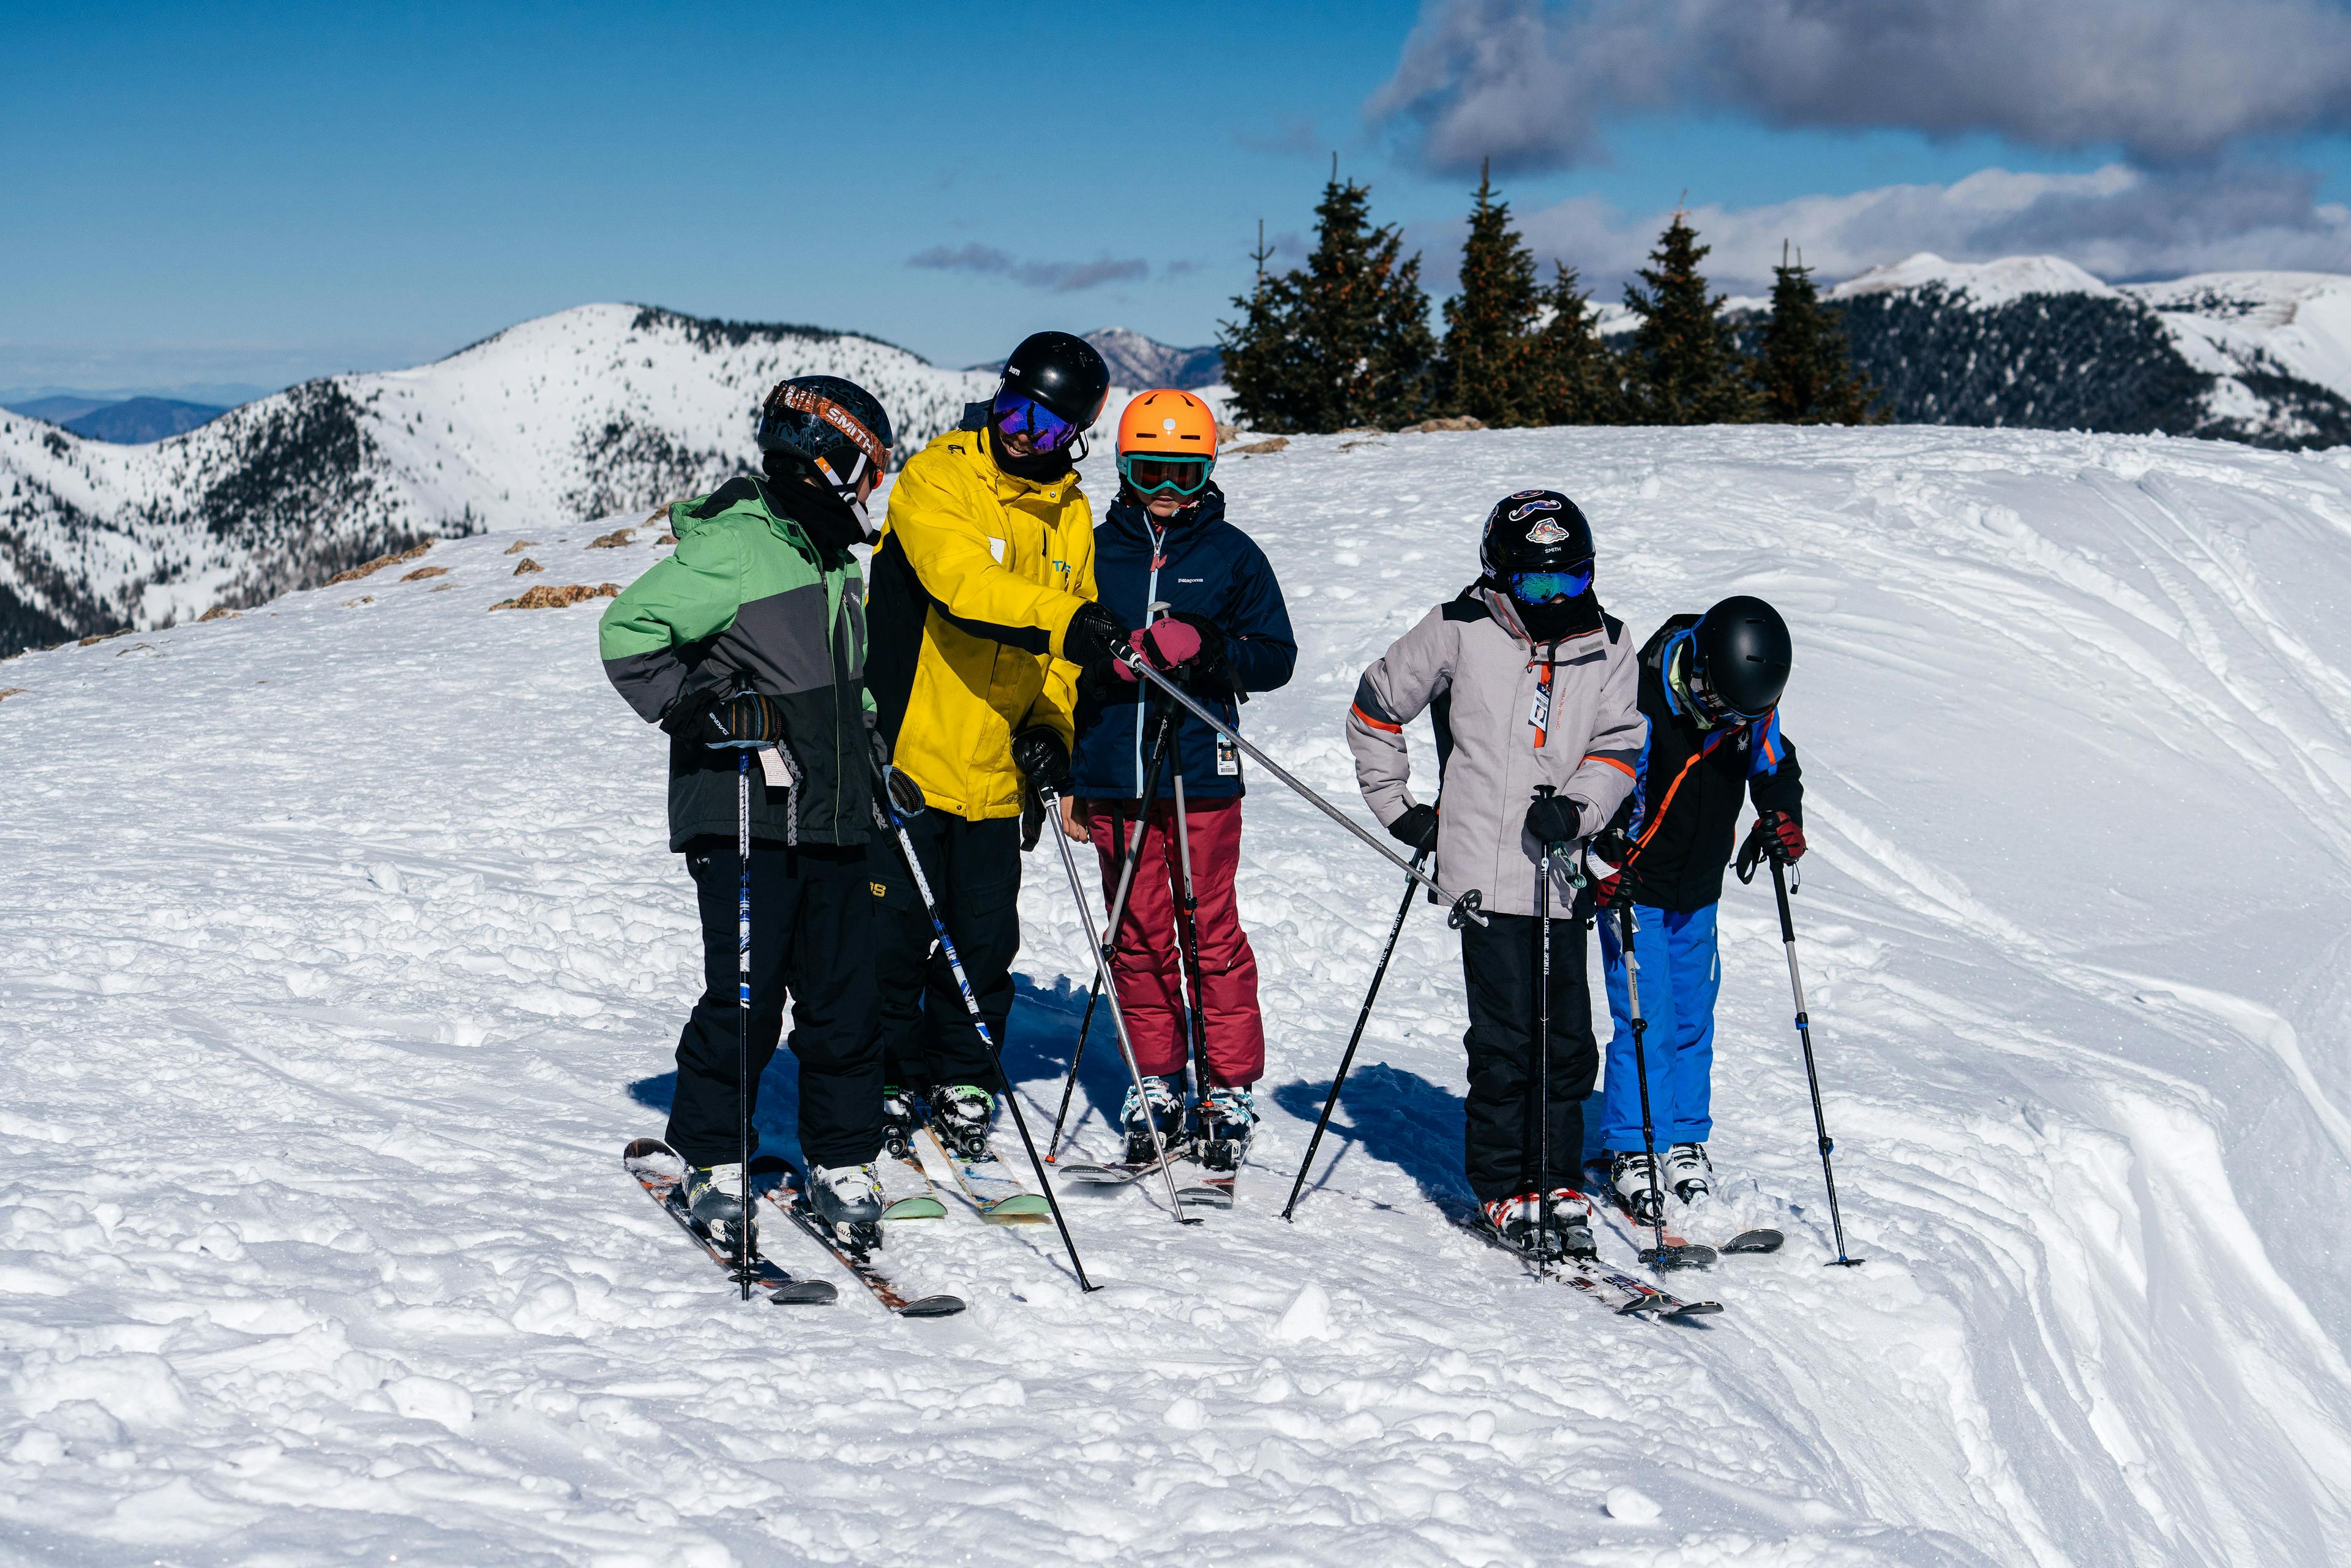 Snowsports instructor explains responsibility code to young skiers on the mountain